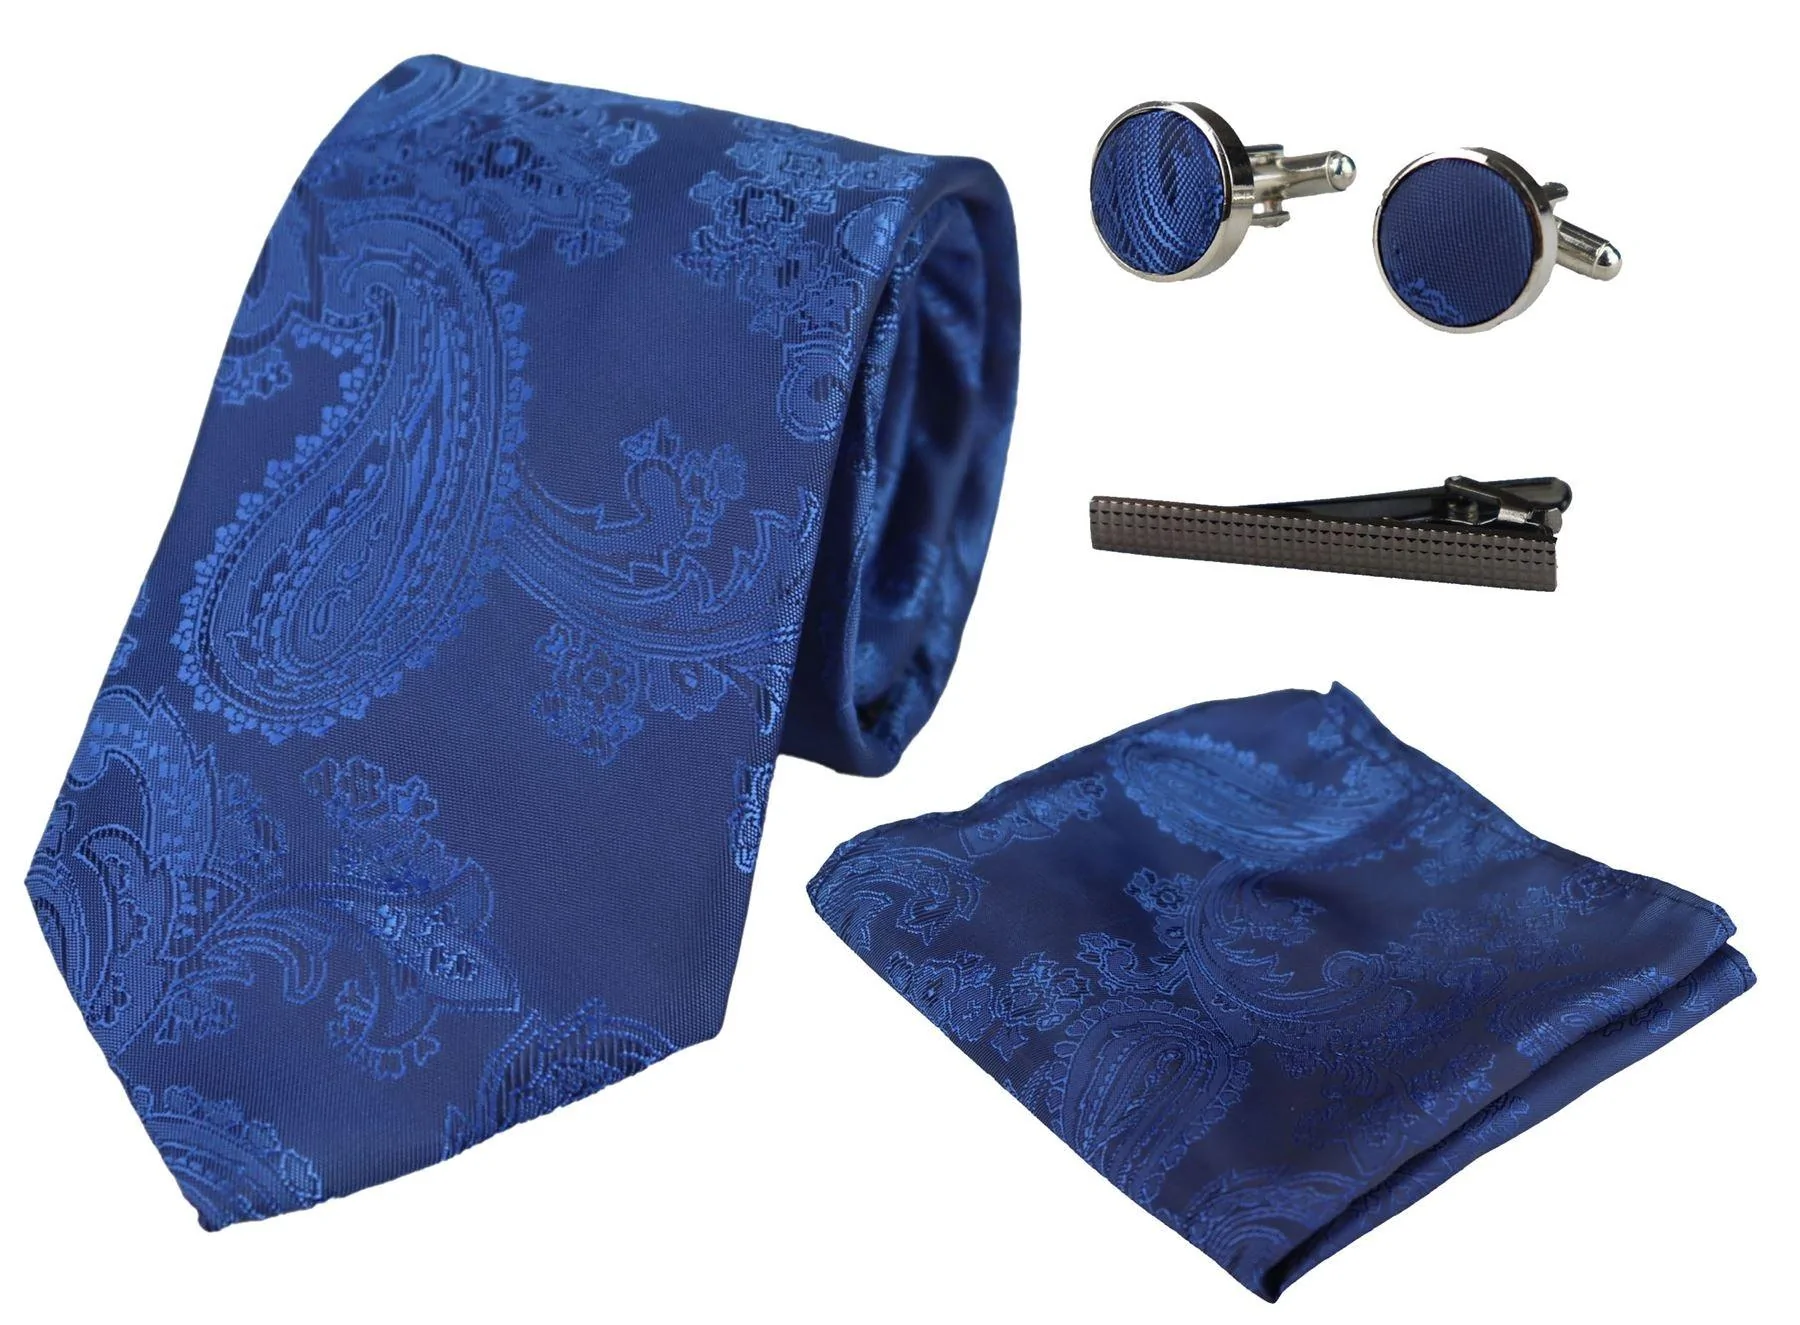 Paisley Neck Blue Tie Gift Set Pocket Square Cuff Links Tie Floral Satin